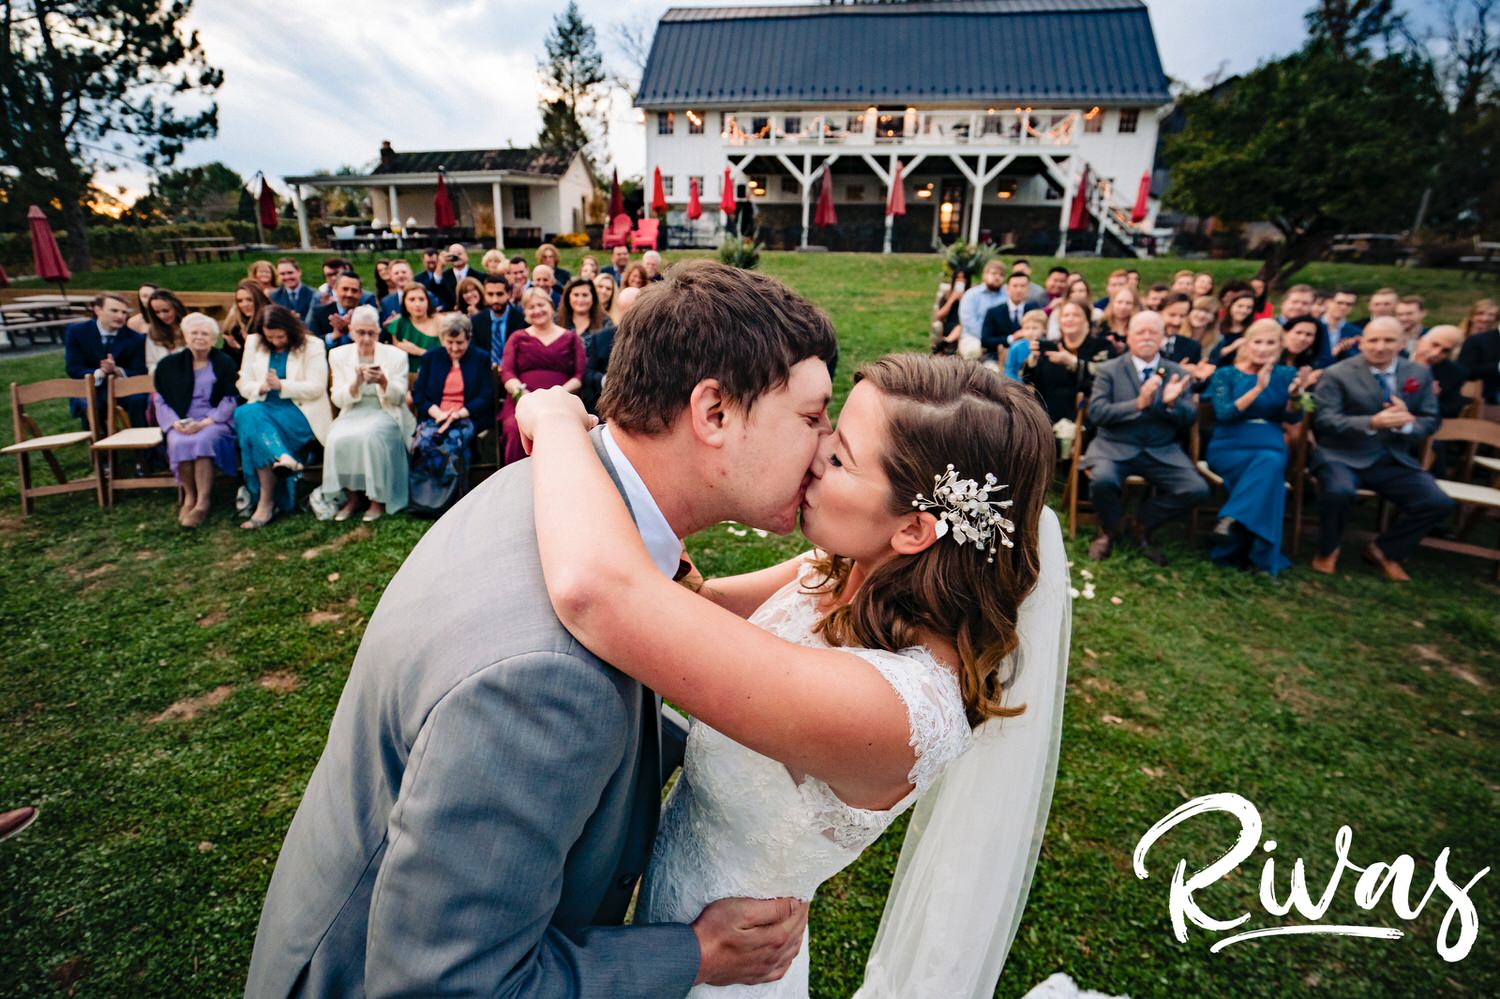 A colorful picture of a bride and groom sharing their first kiss taken from behind the altar, looking back at their wedding guests during a fall wedding at The Barns at Hamilton Station Vineyard. 